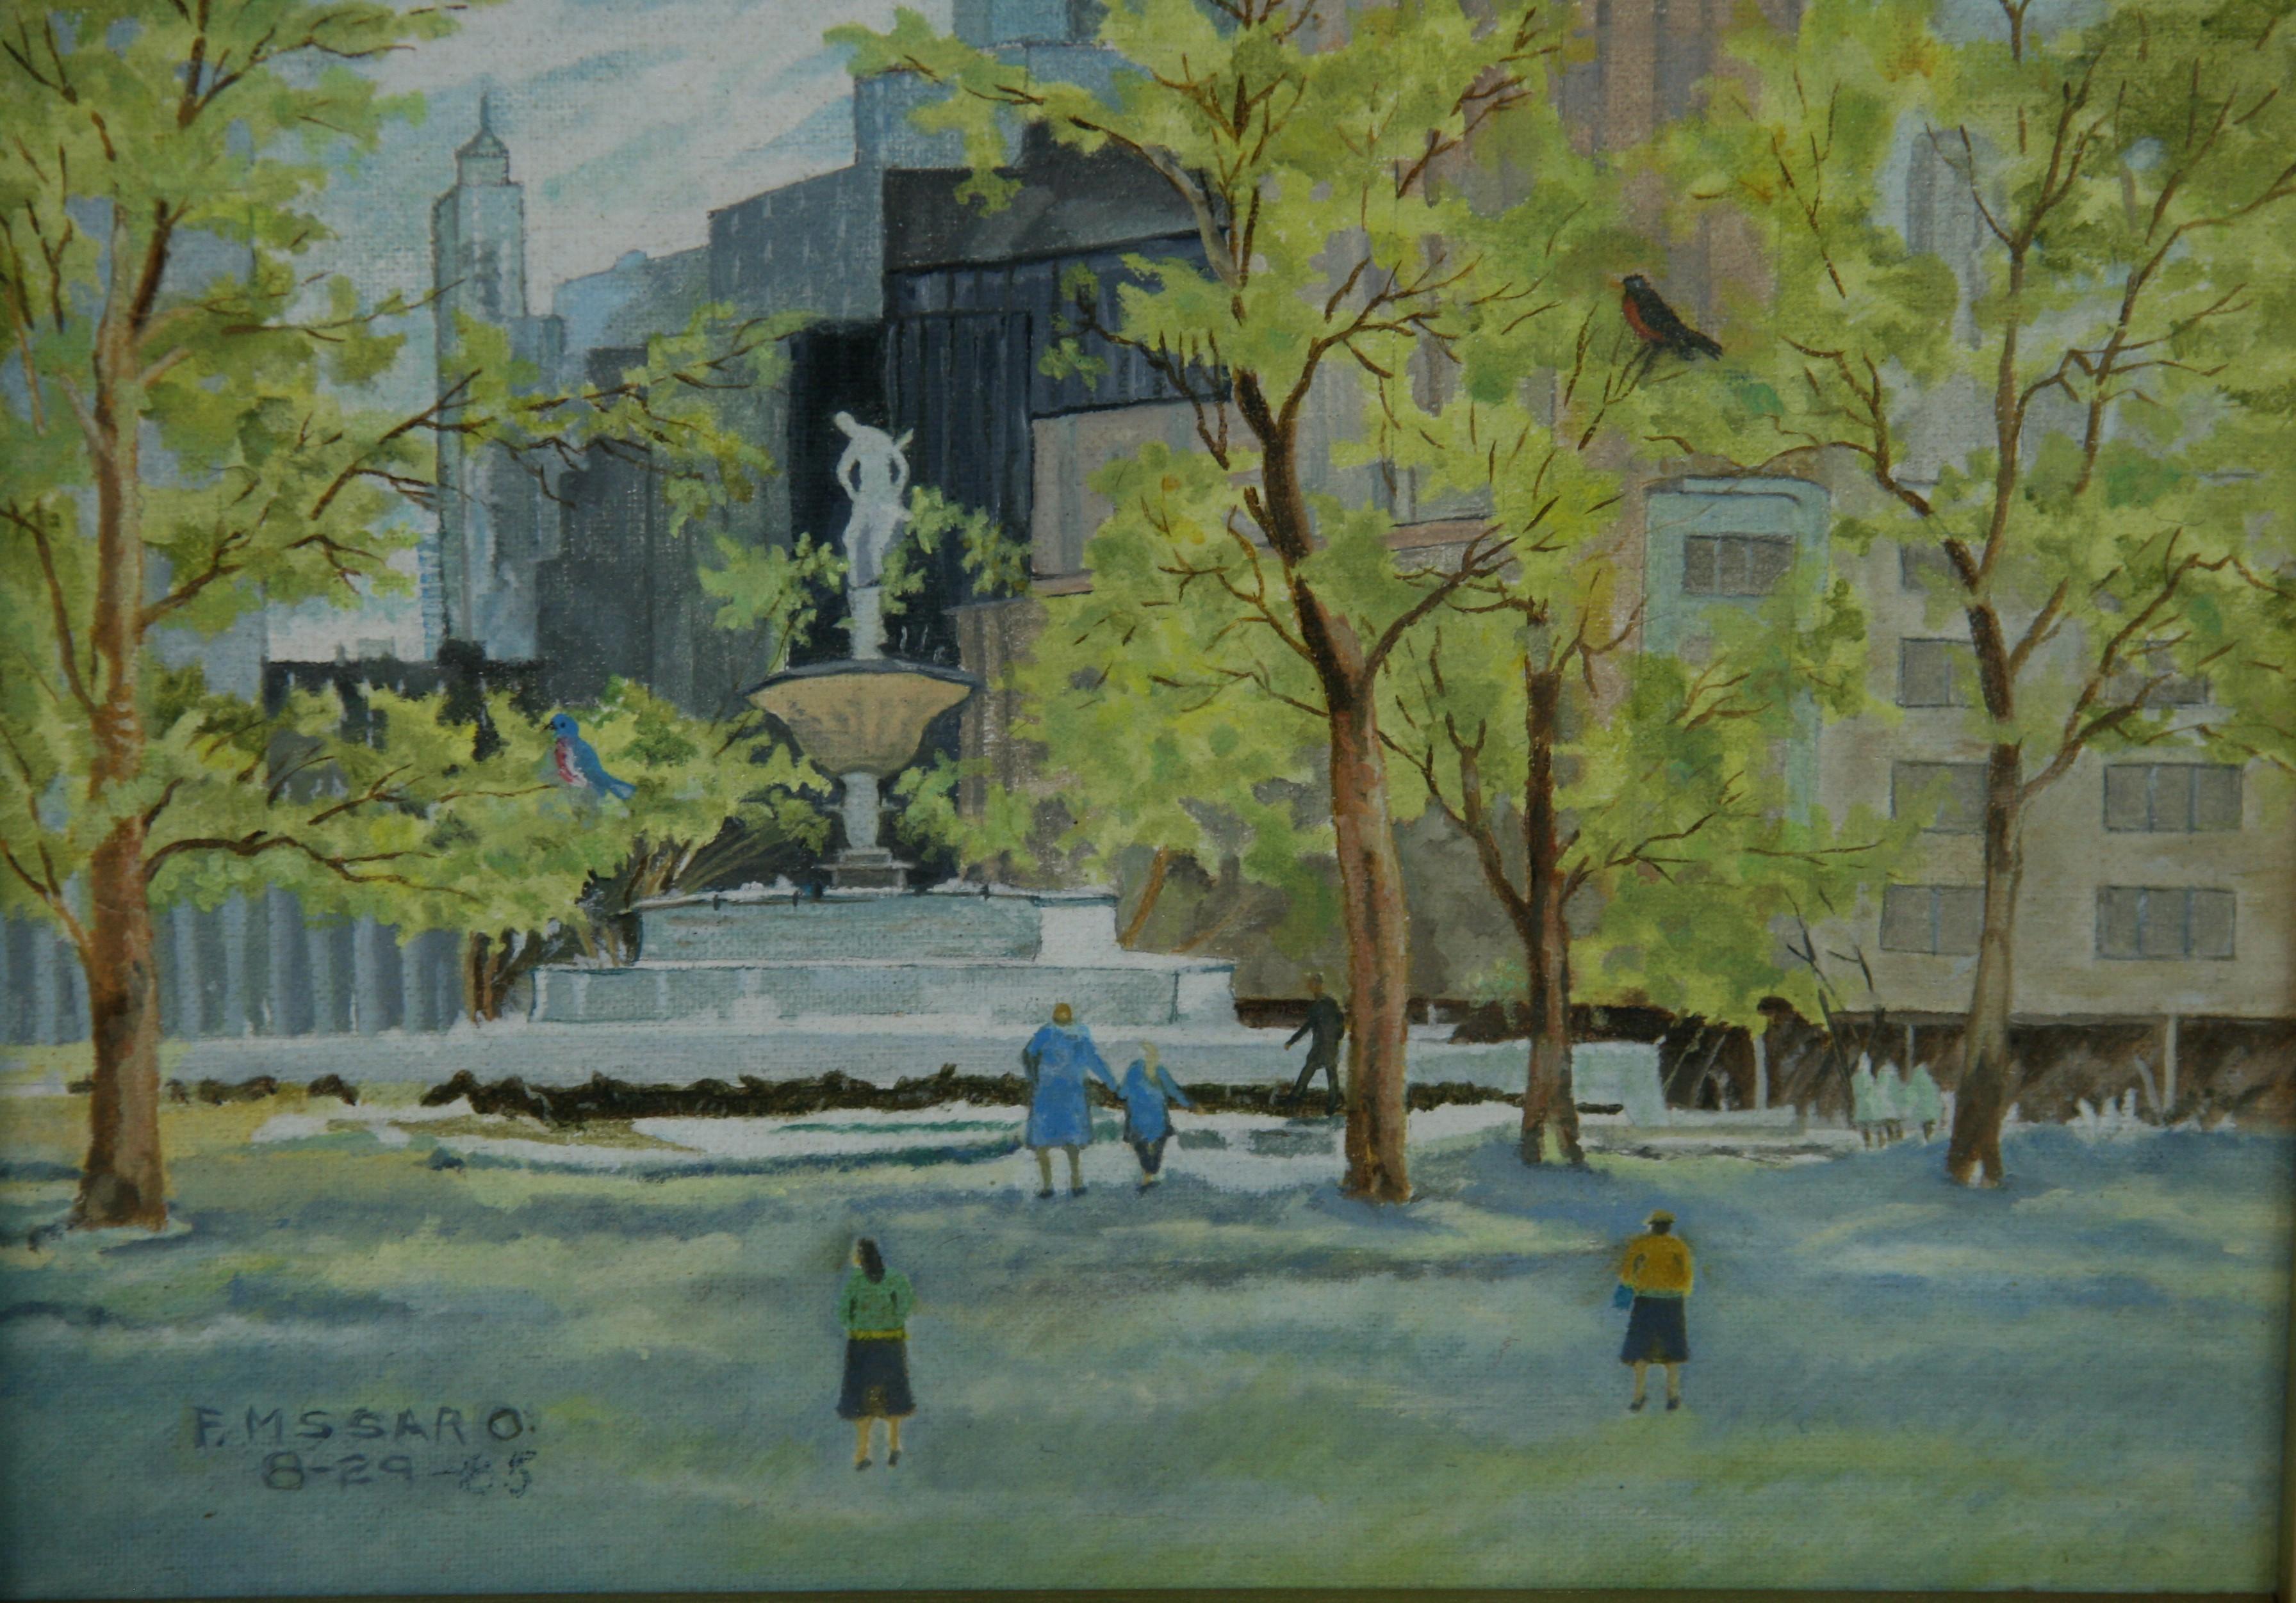 5025 Central Park fountain city scape 
Framed .Signed F.Mssaro